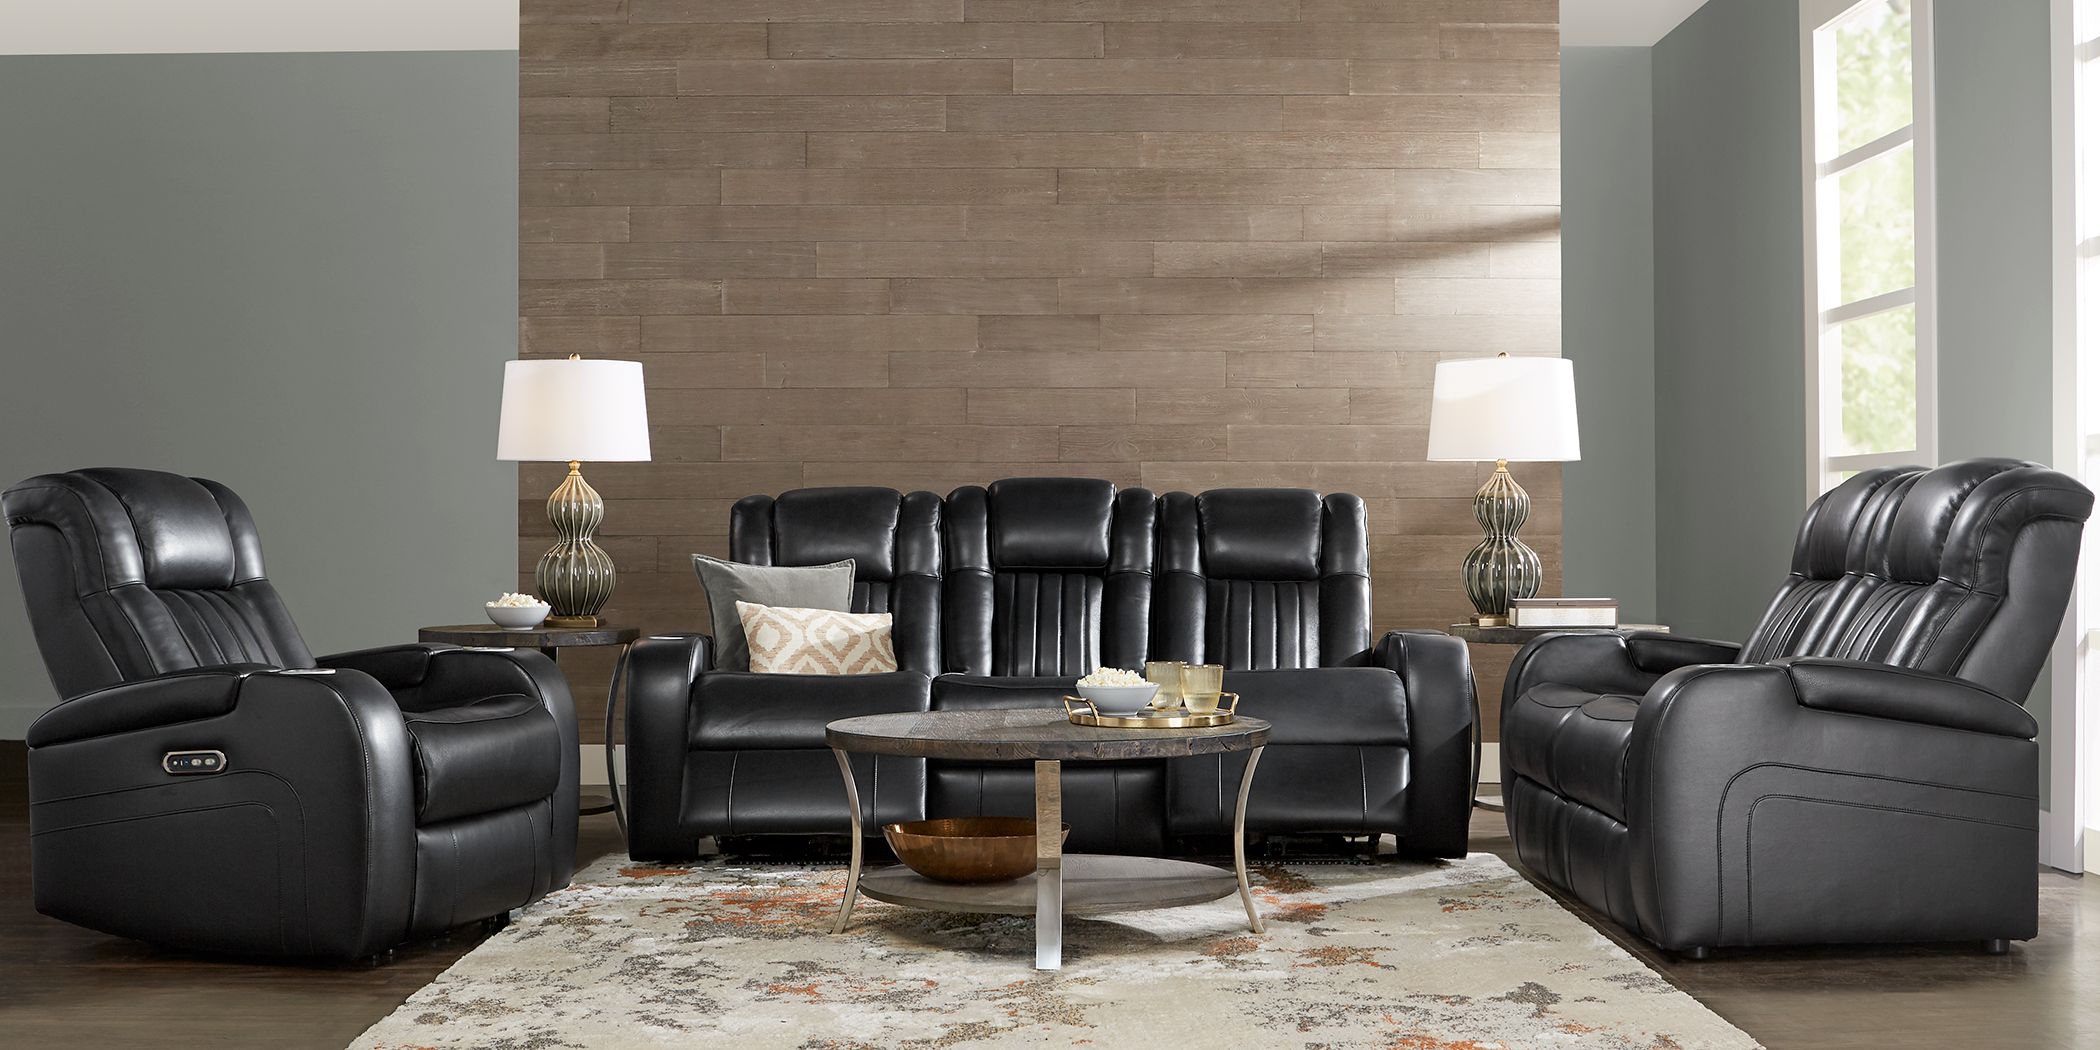 5 Piece Living Room Furniture Sets With Sofas